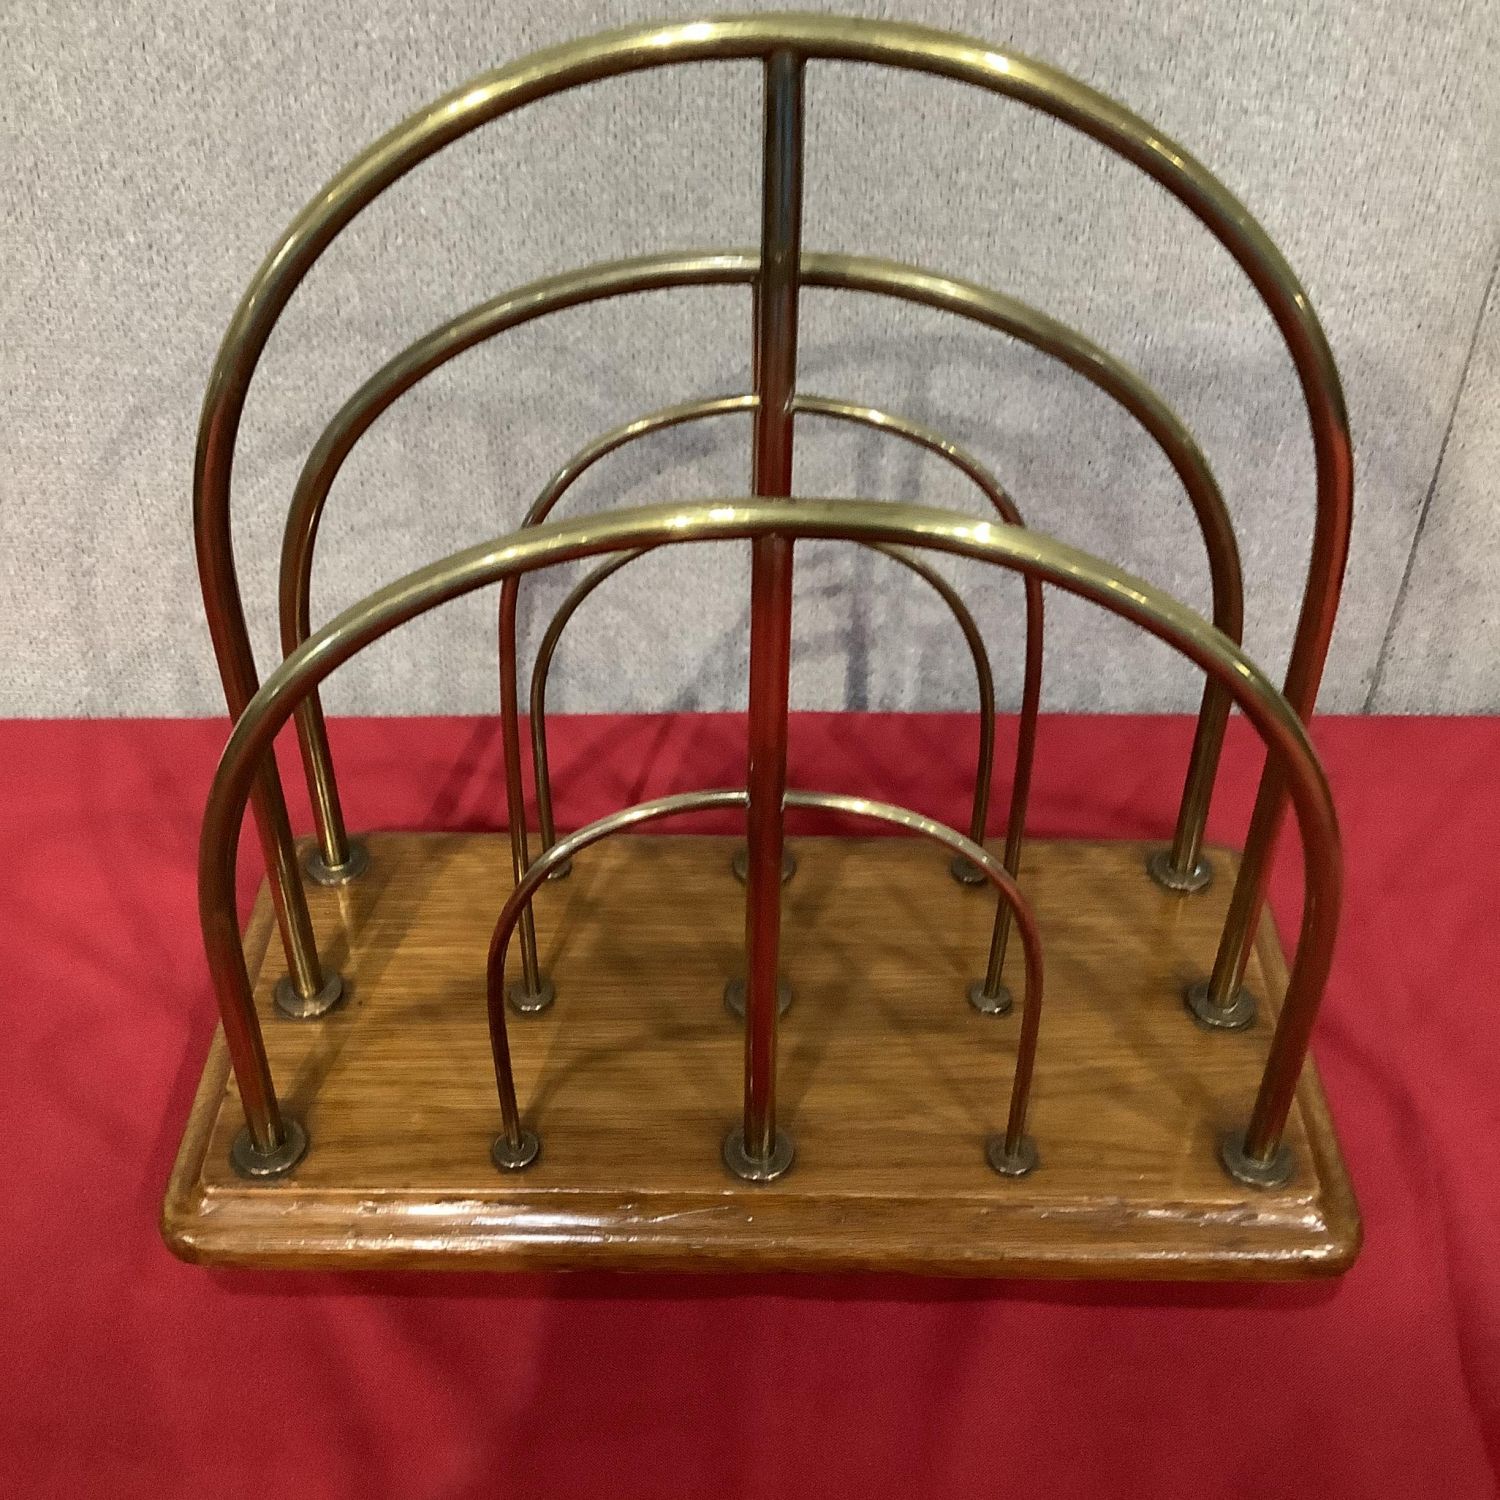 Early 20th Century Brass and Glass Birdcage